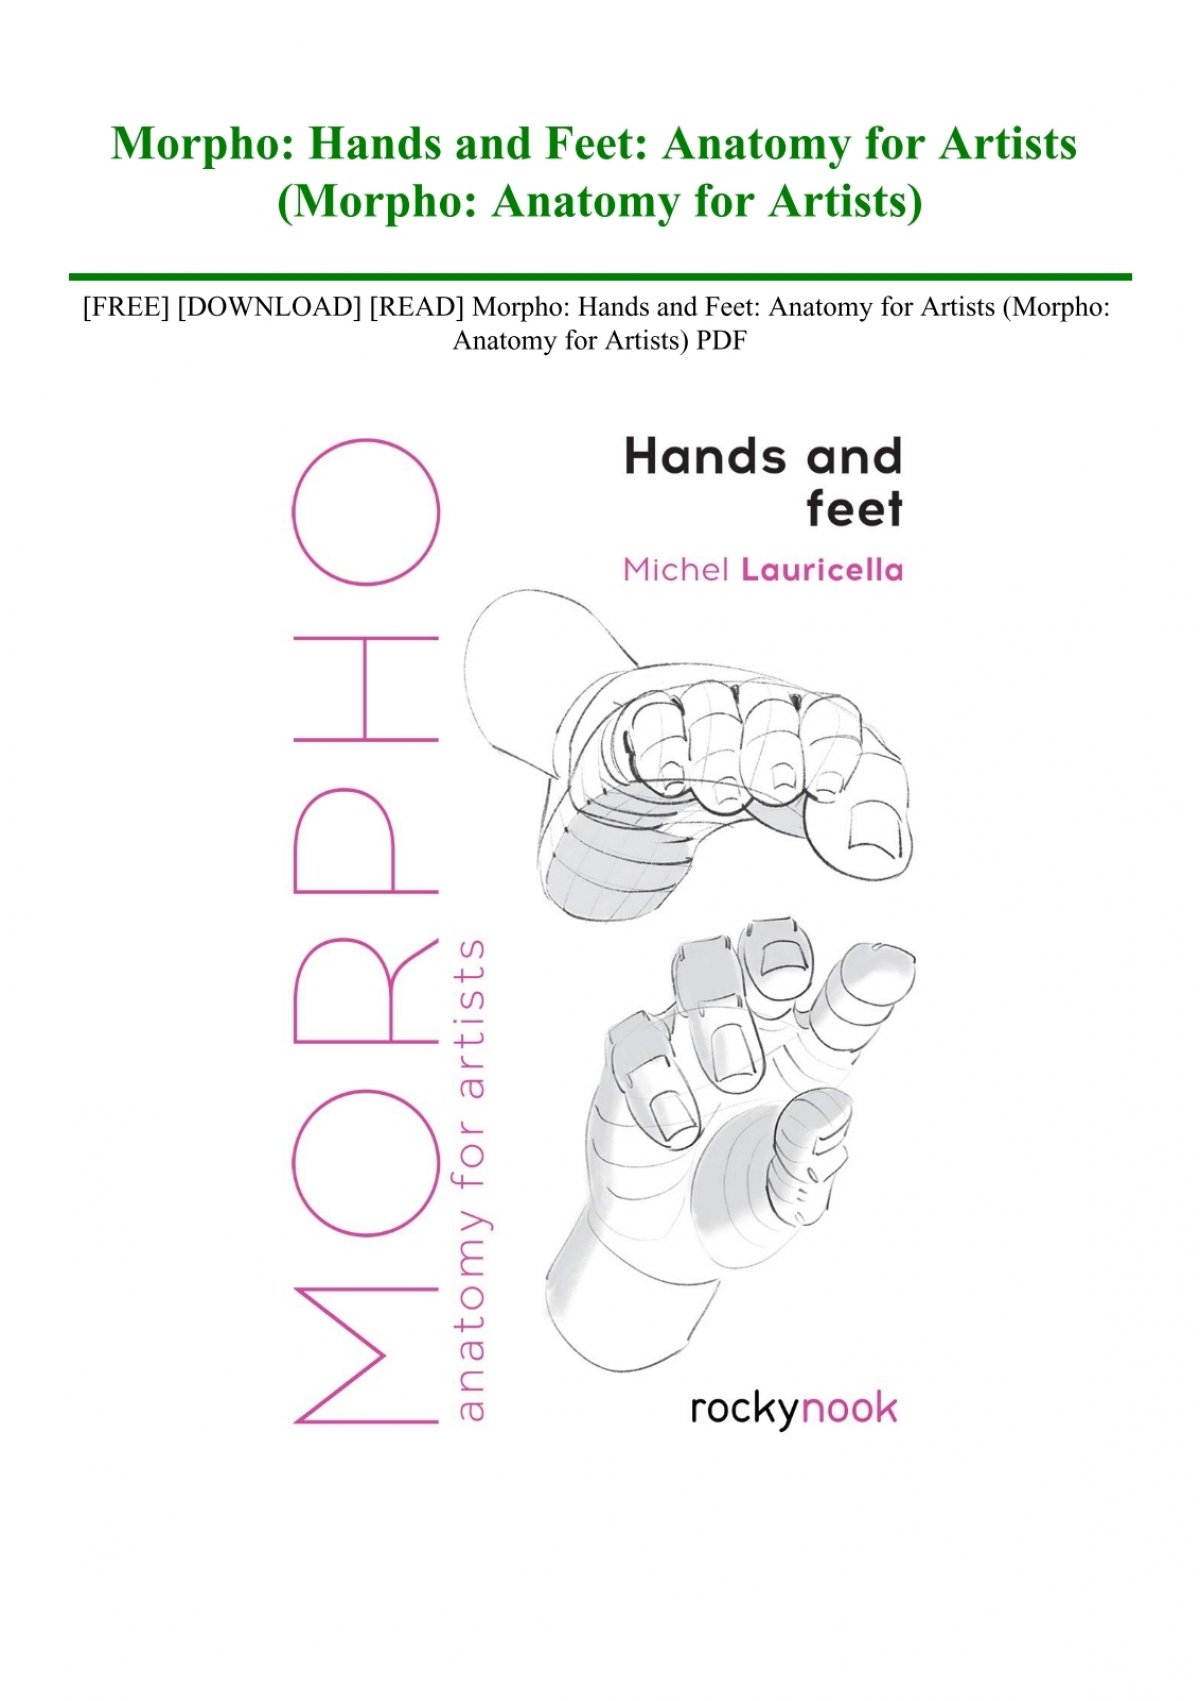 [FREE] [DOWNLOAD] [READ] Morpho Hands and Feet Anatomy for Artists